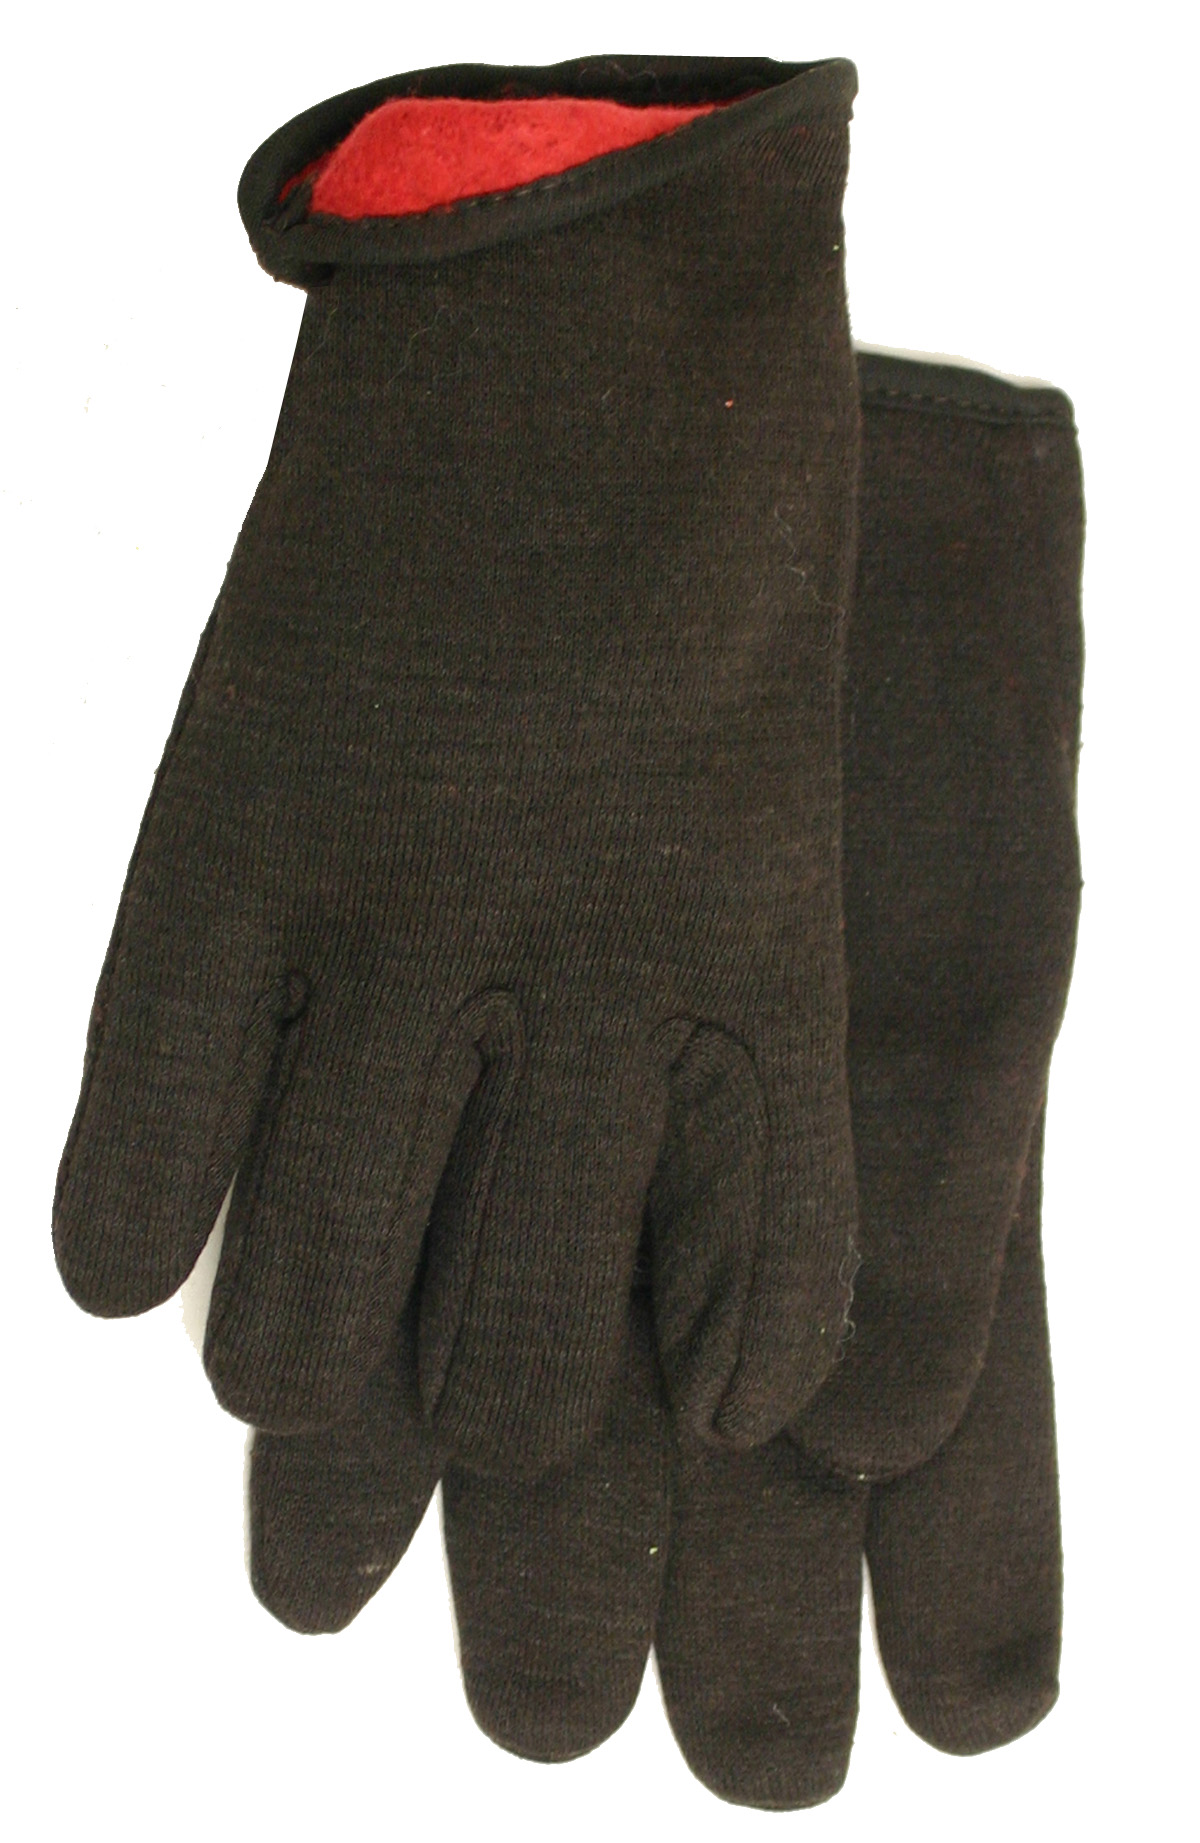 Lined Brown Jersey Glove - Midwest Glove